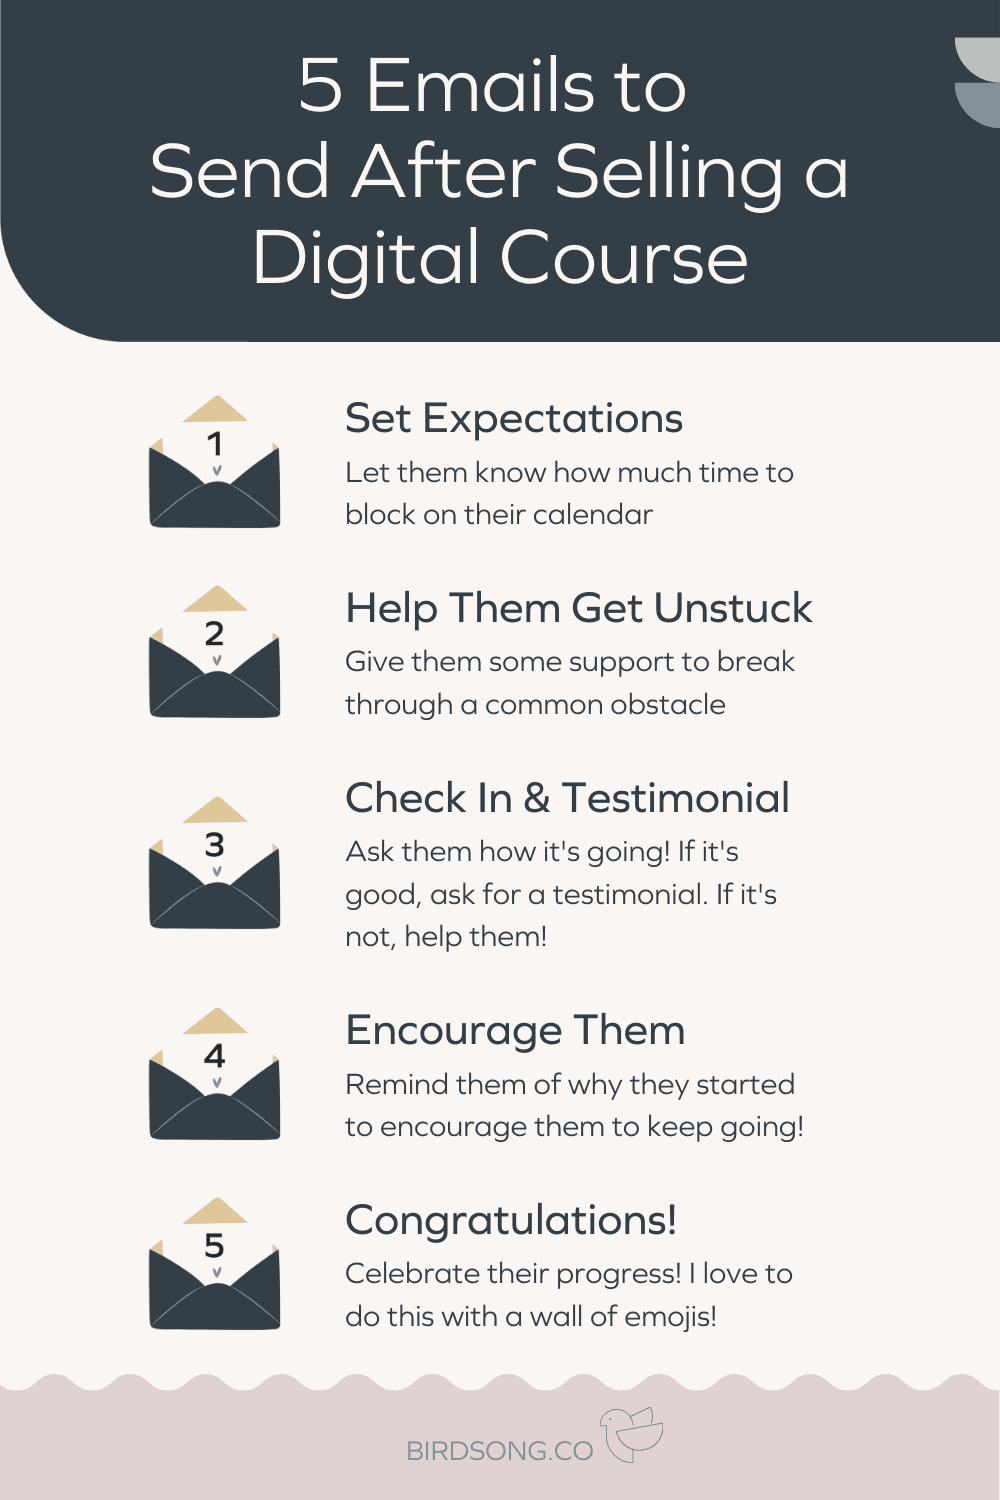 5 Emails to Send After Selling a Digital Course